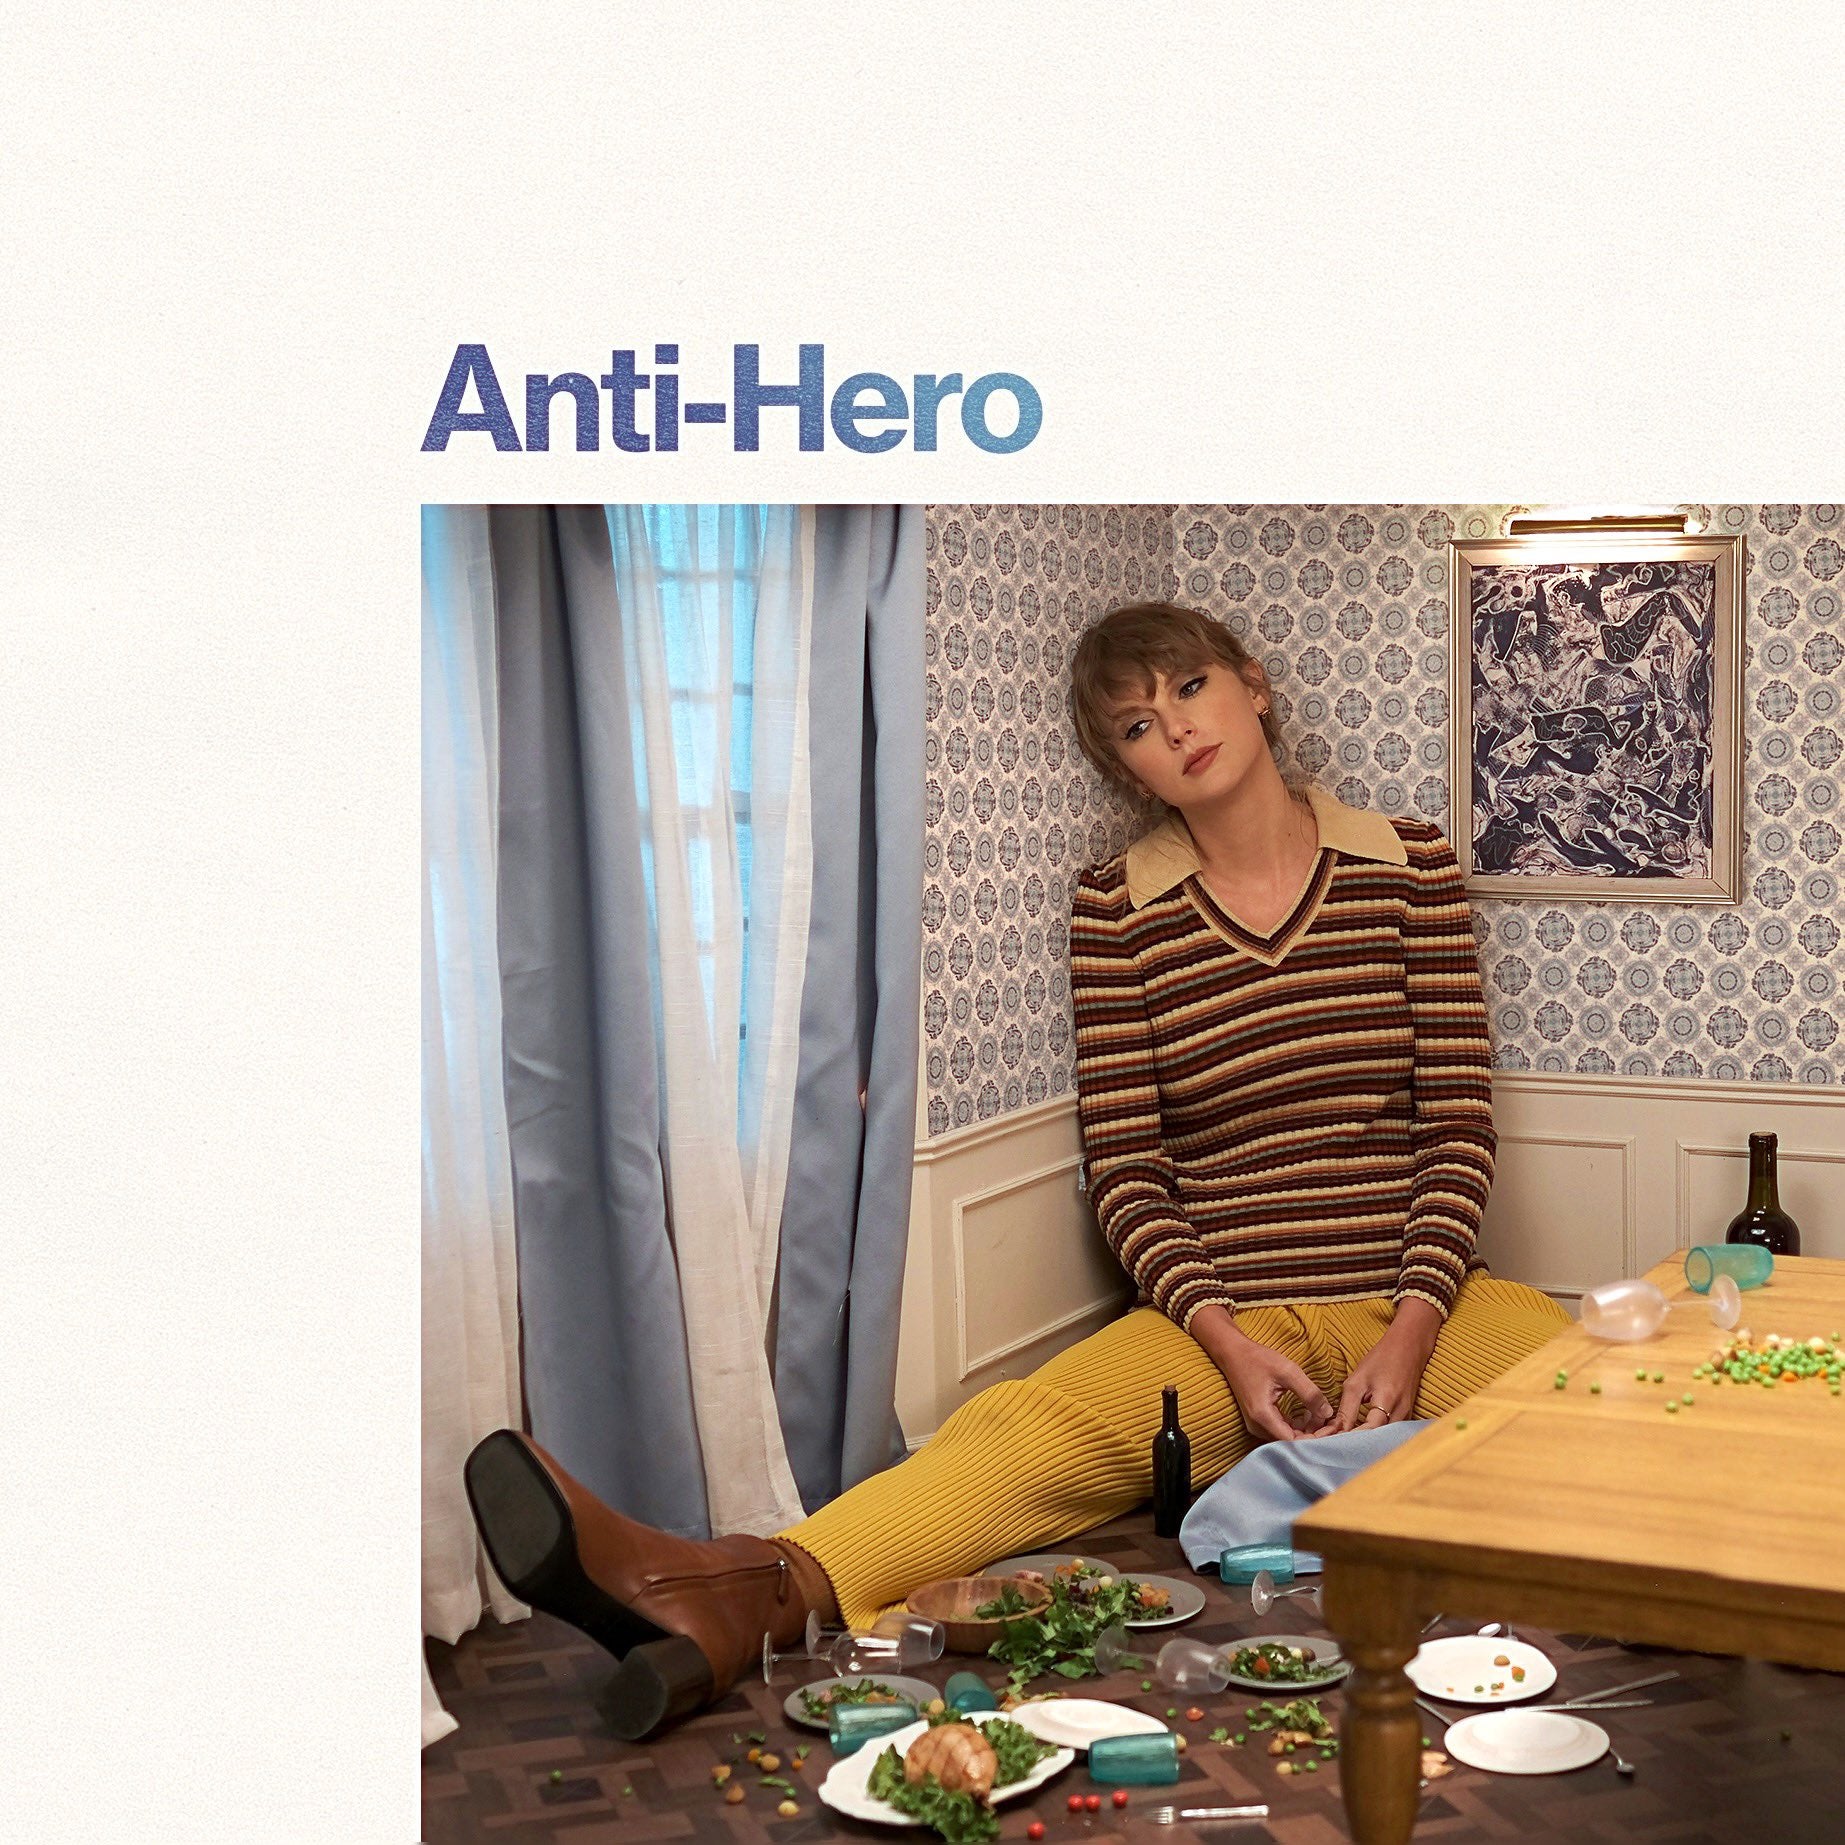 How "Anti-Hero" by Taylor Swift was made